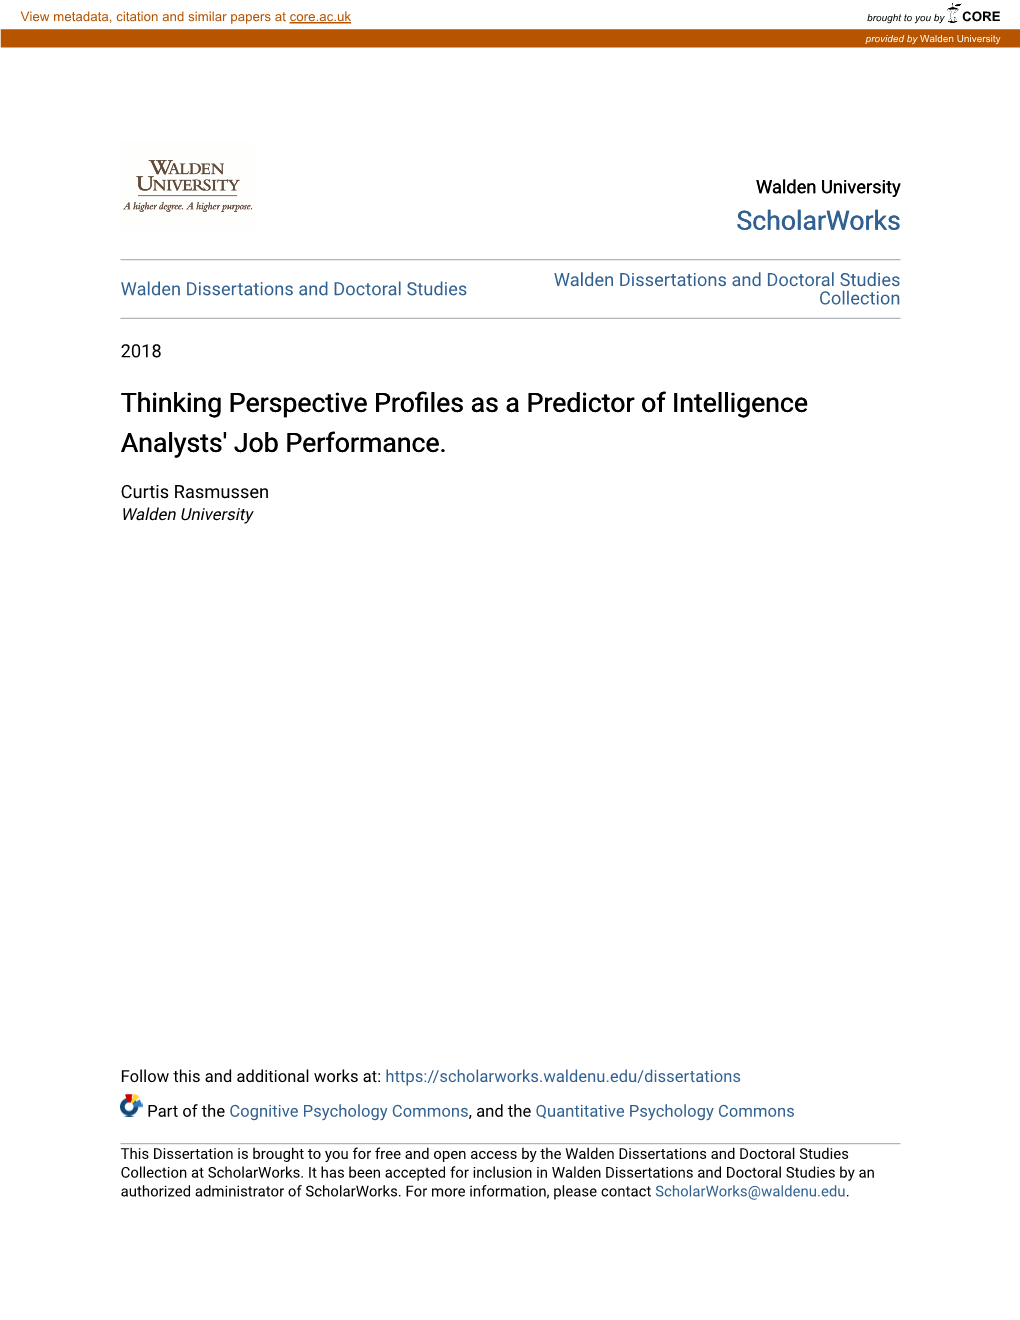 Thinking Perspective Profiles As a Predictor of Intelligence Analysts' Job Performance